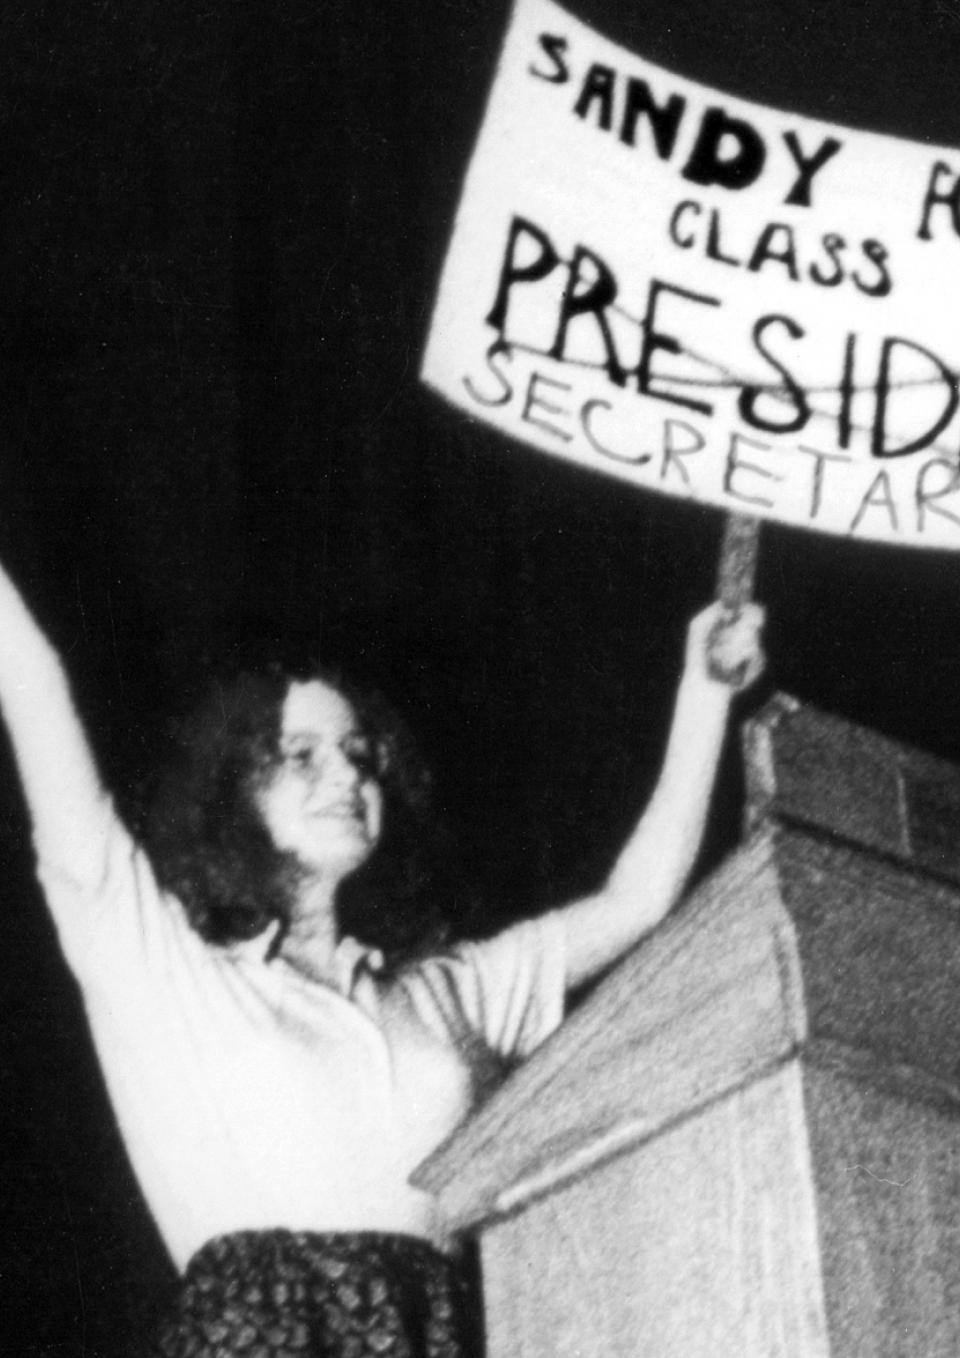 In this black and white still from the film, a young woman triumphantly holds up a sign that reads “Sandy For Class President.” The word ‘President’ is crossed out and underneath is written “Secretary”. She’s onstage at a lectern.